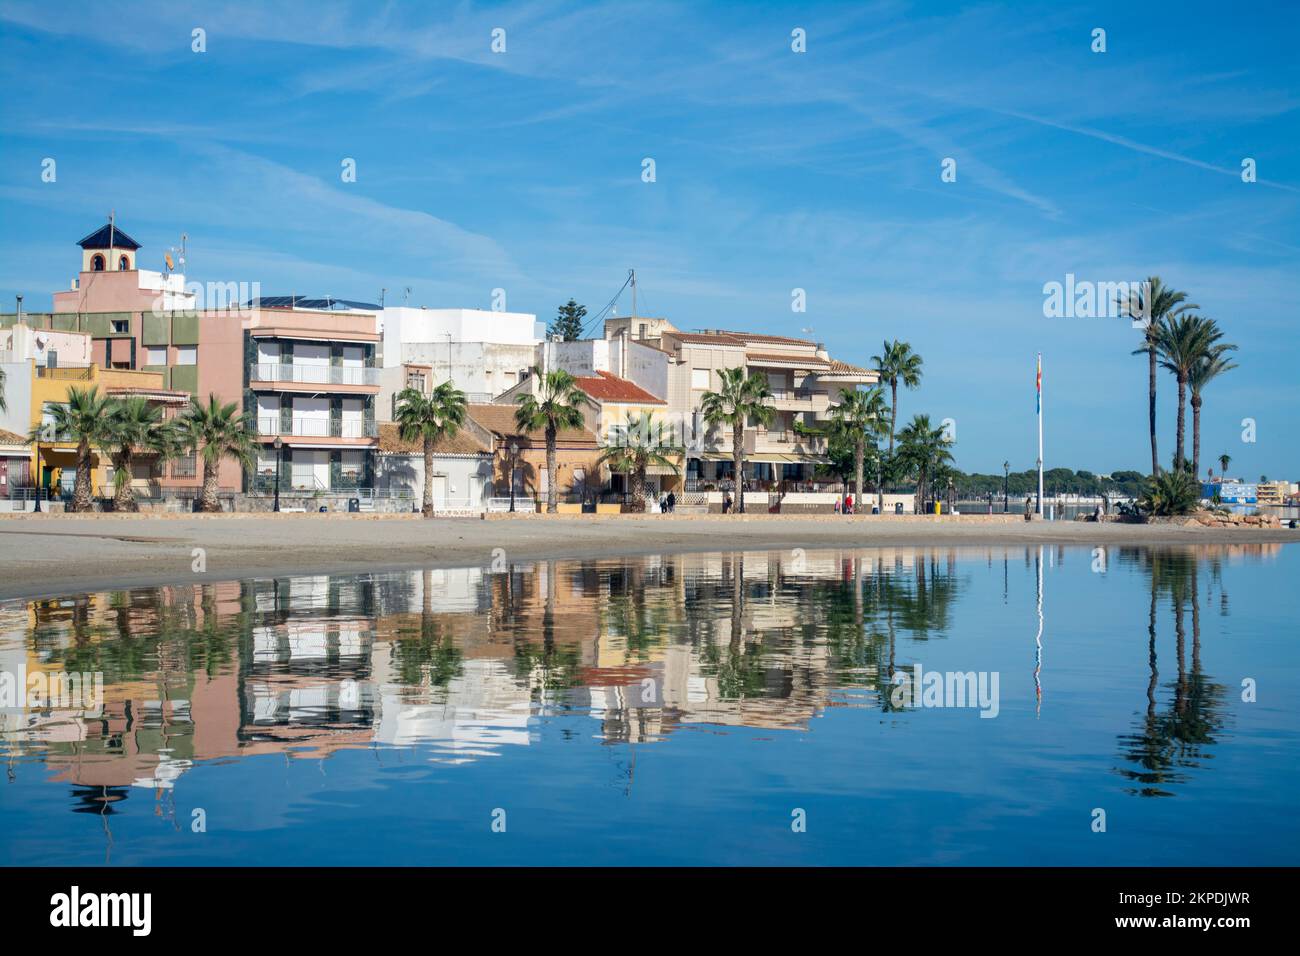 Building reflected in the calm waters of the Mar Menor on the Costa Calida in the Spanish resort of Los alcazares. Stock Photo